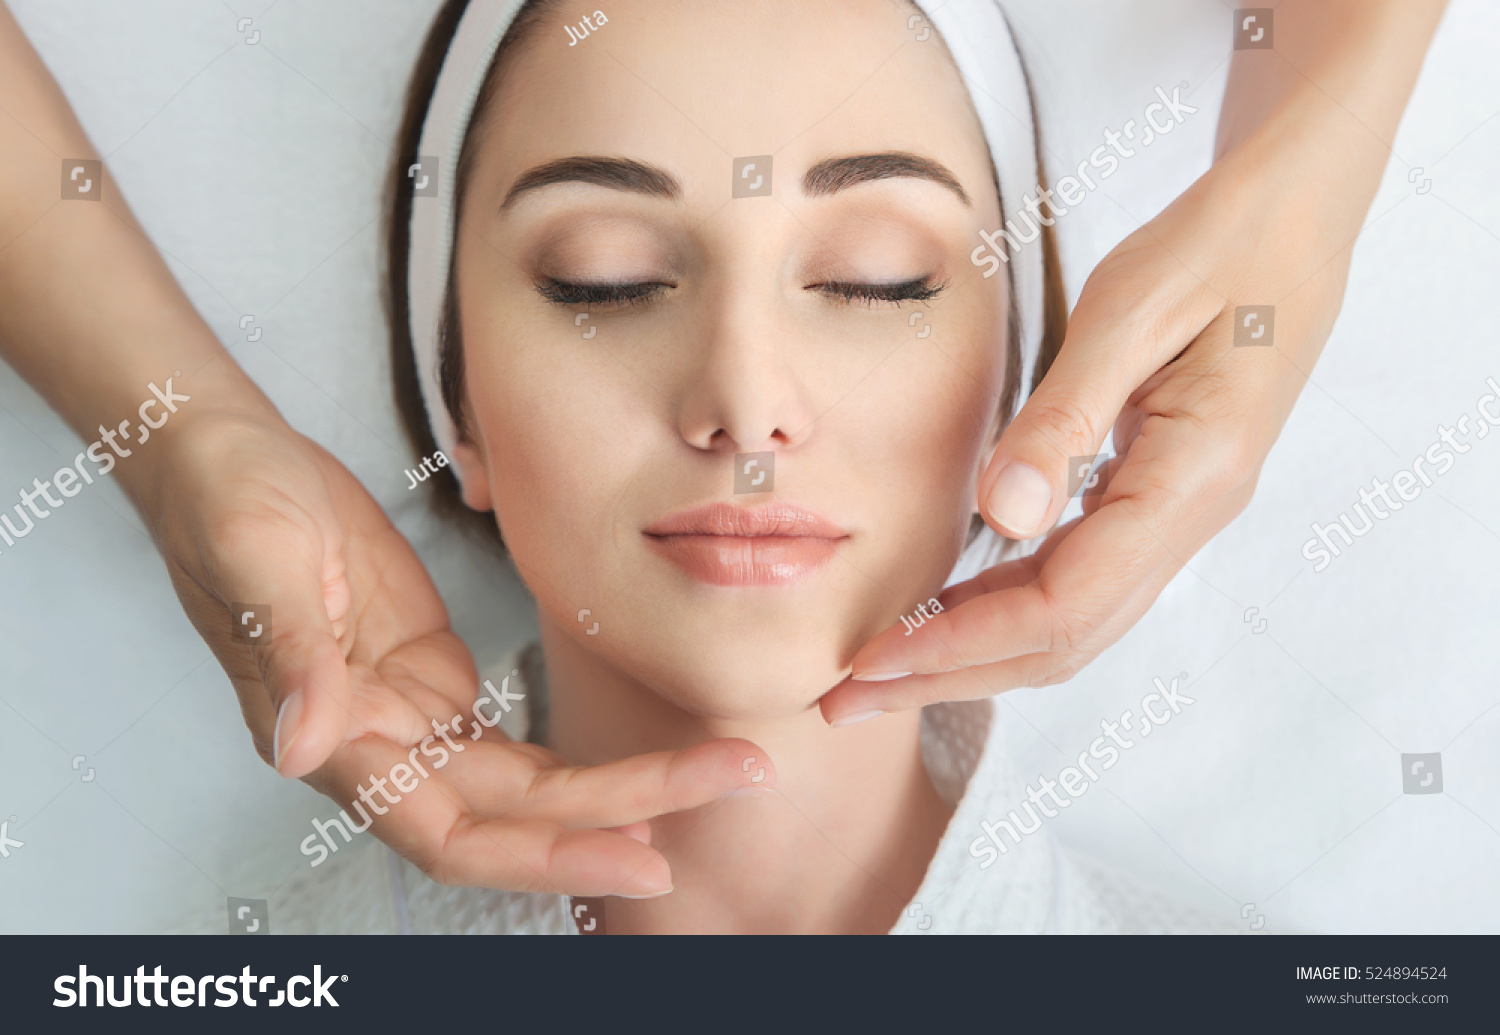 Face massage. Spa skin and body care. Close-up of young woman getting spa massage treatment at beauty spa salon. Facial beauty treatment. #524894524